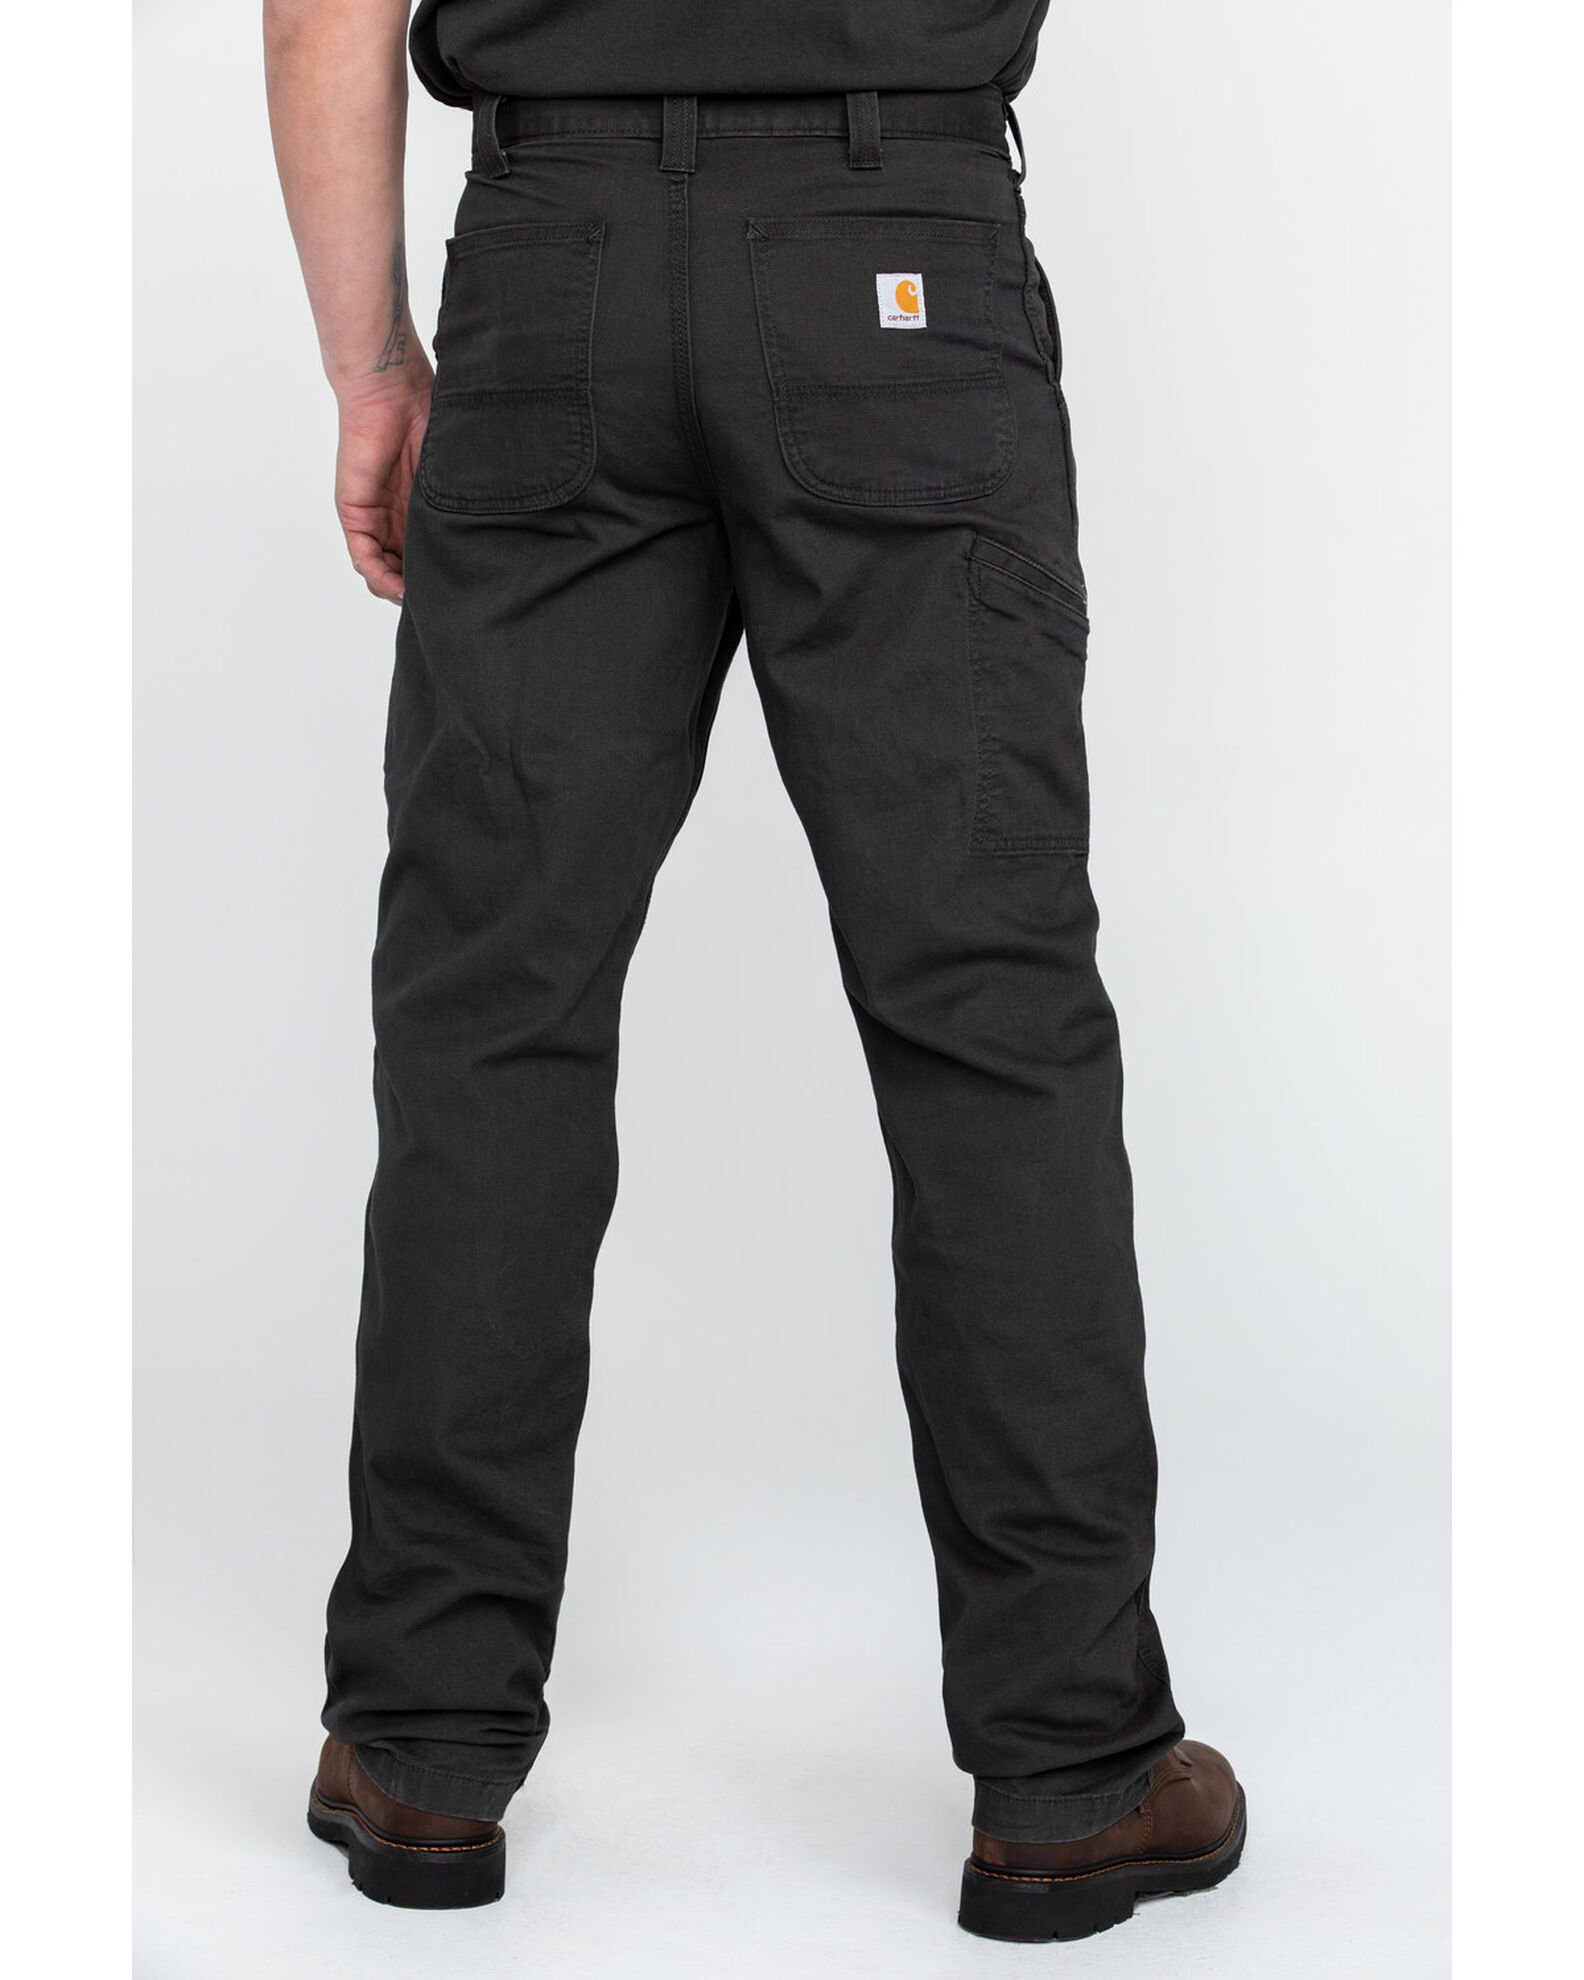 Product Name: Carhartt Men's Peat Rugged Flex Rigby Dungaree Work Pants